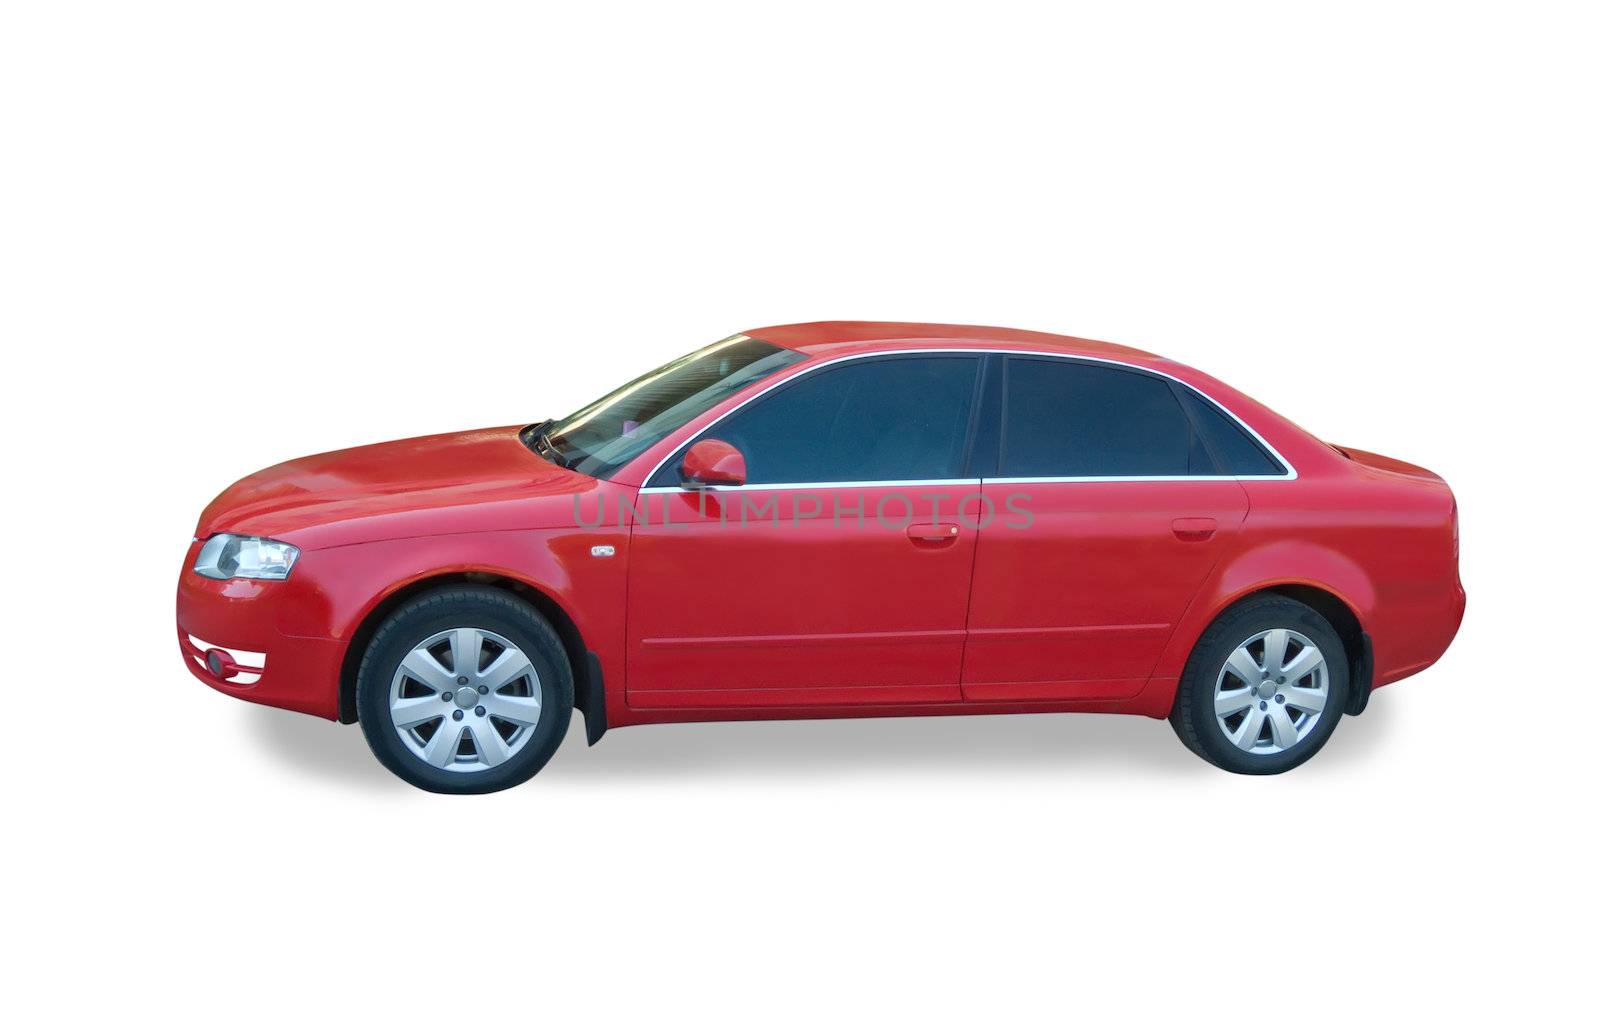 new red family car on white. Isolated whith clipping path by Jim